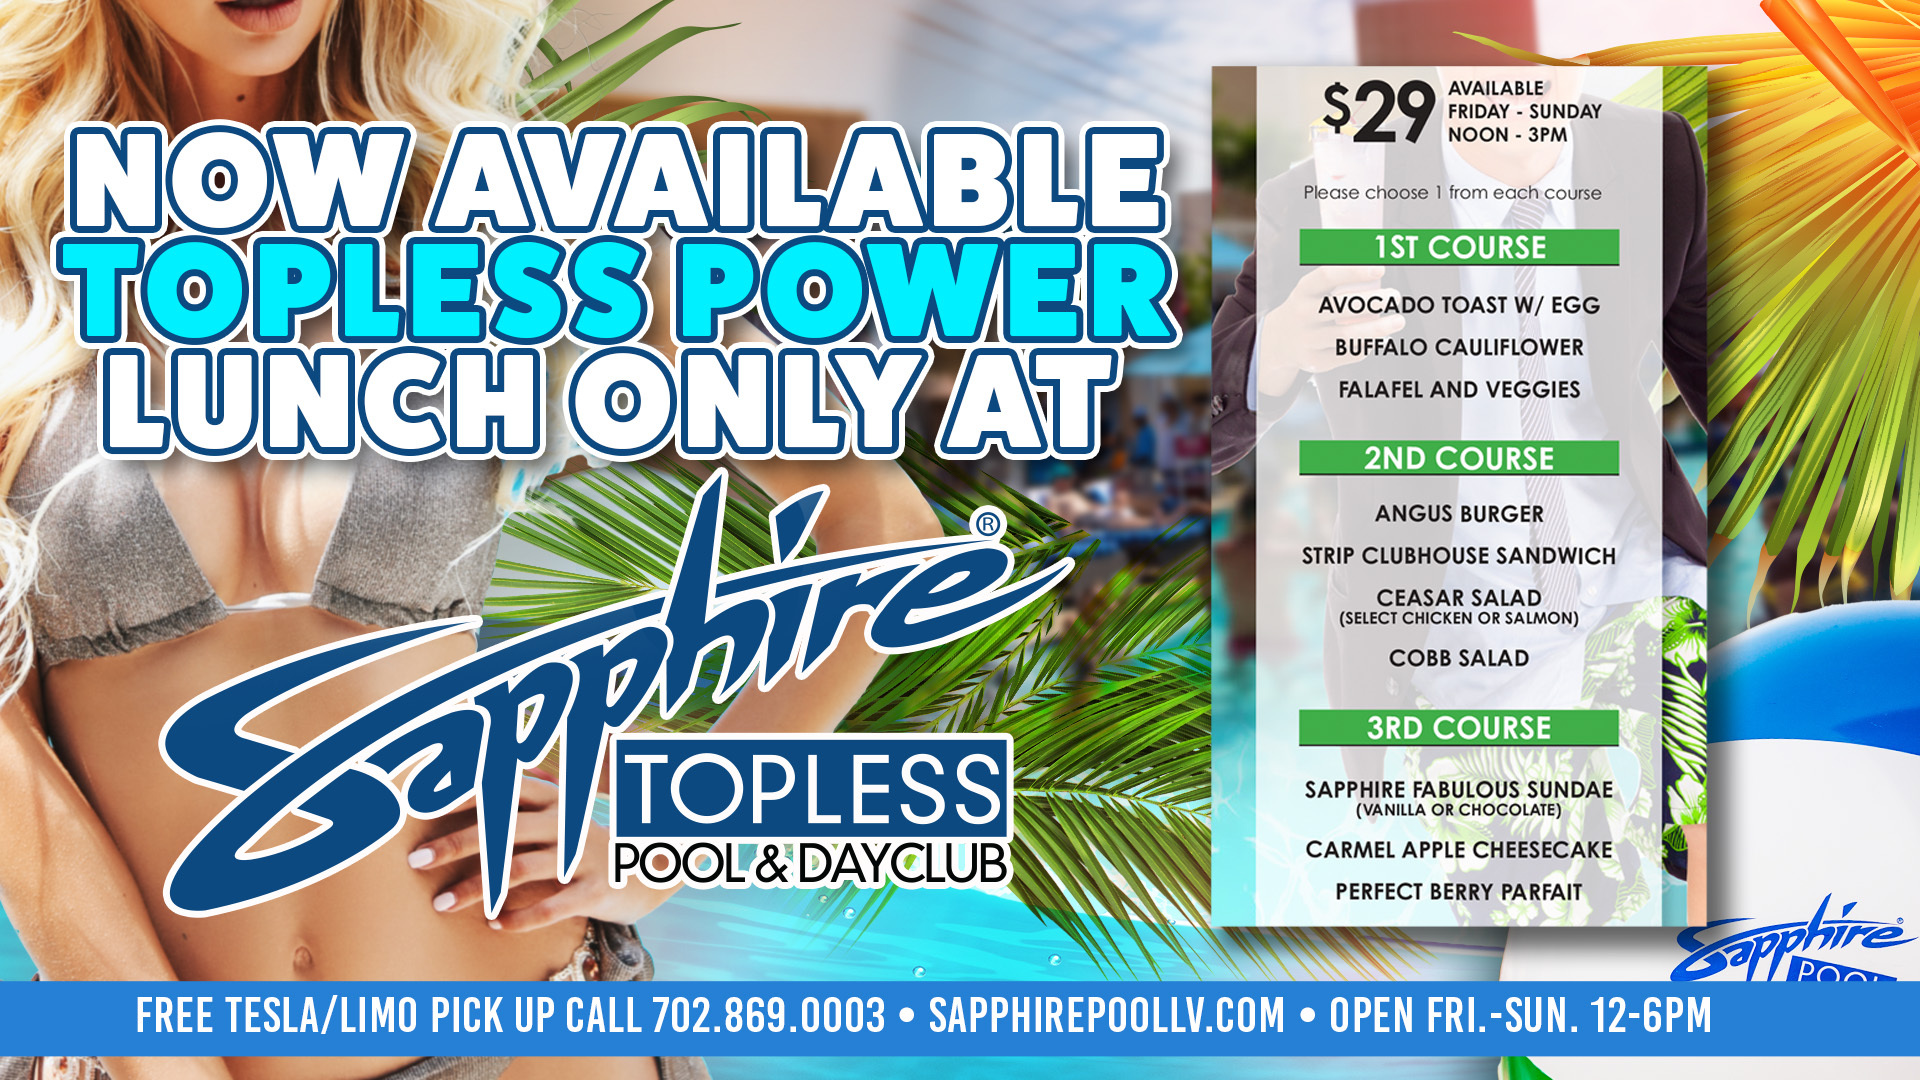 The Sapphire Topless Power Lunch